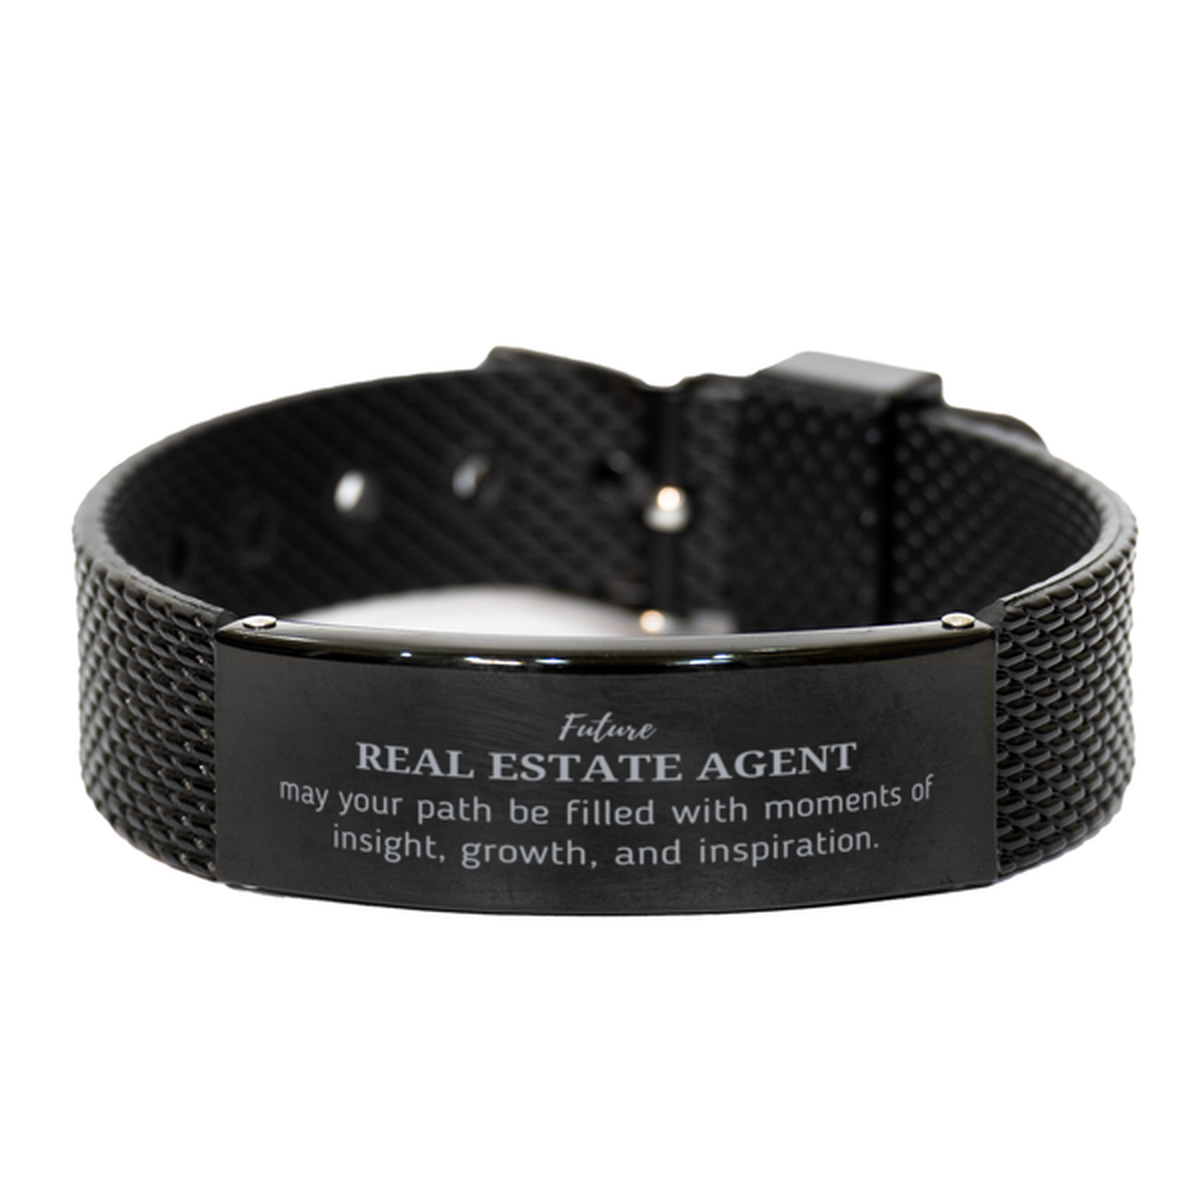 Future Real Estate Agent Gifts, May your path be filled with moments of insight, Graduation Gifts for New Real Estate Agent, Christmas Unique Black Shark Mesh Bracelet For Men, Women, Friends